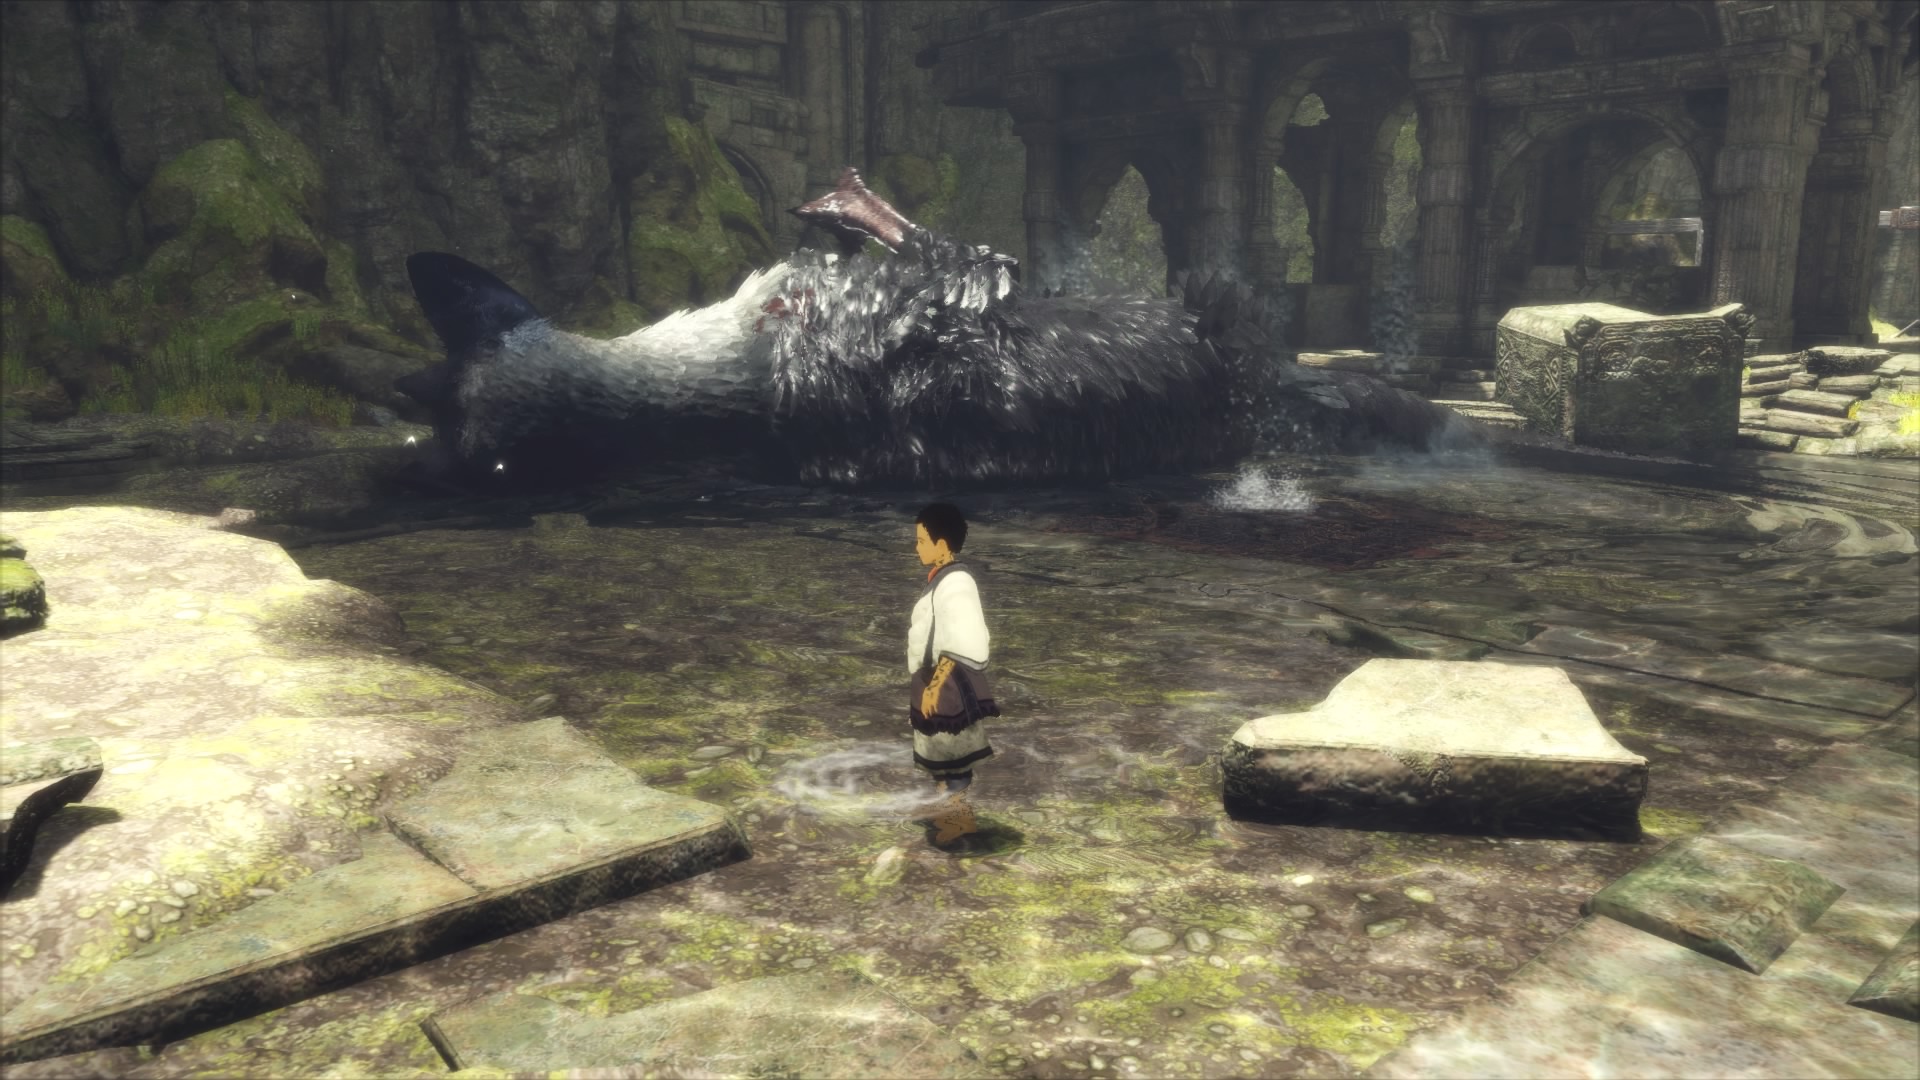 Review: The Last Guardian Was Worth the Wait